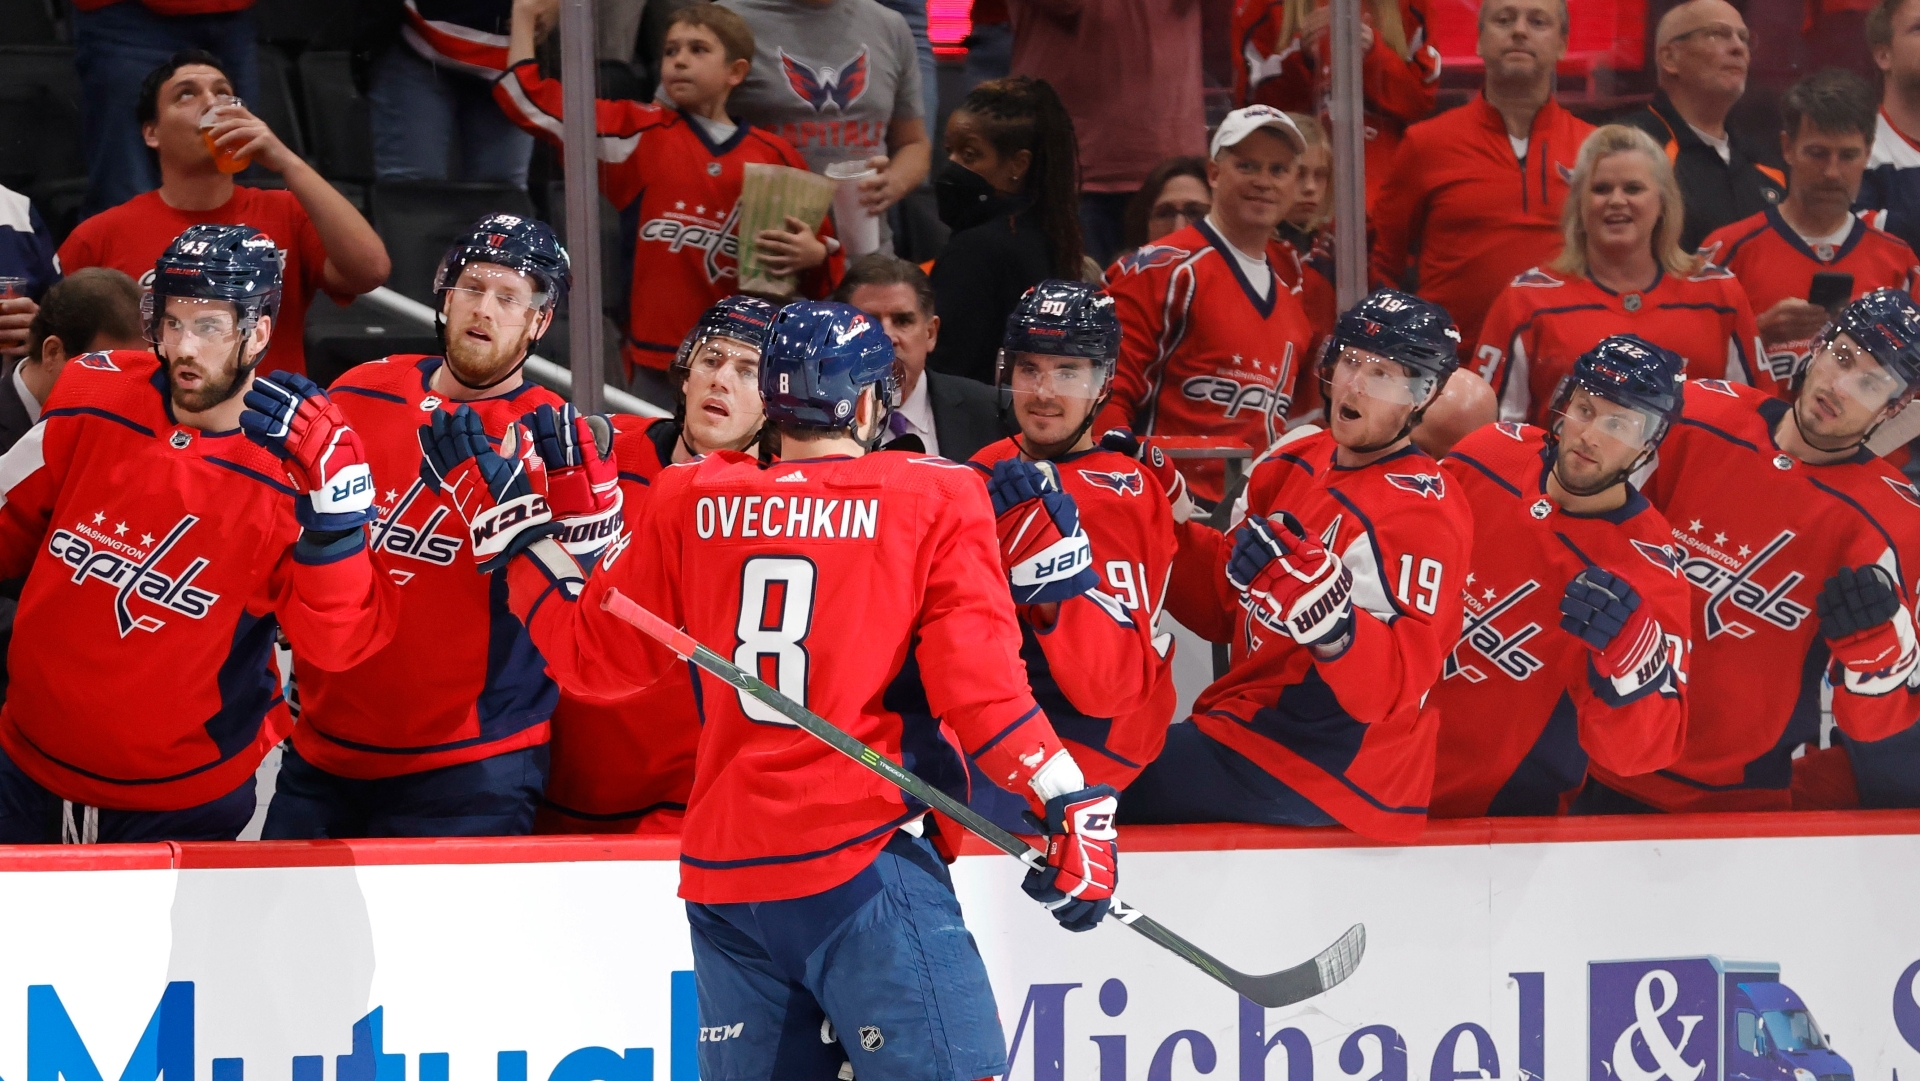 Capitals milestones to watch for during the 2022-23 season